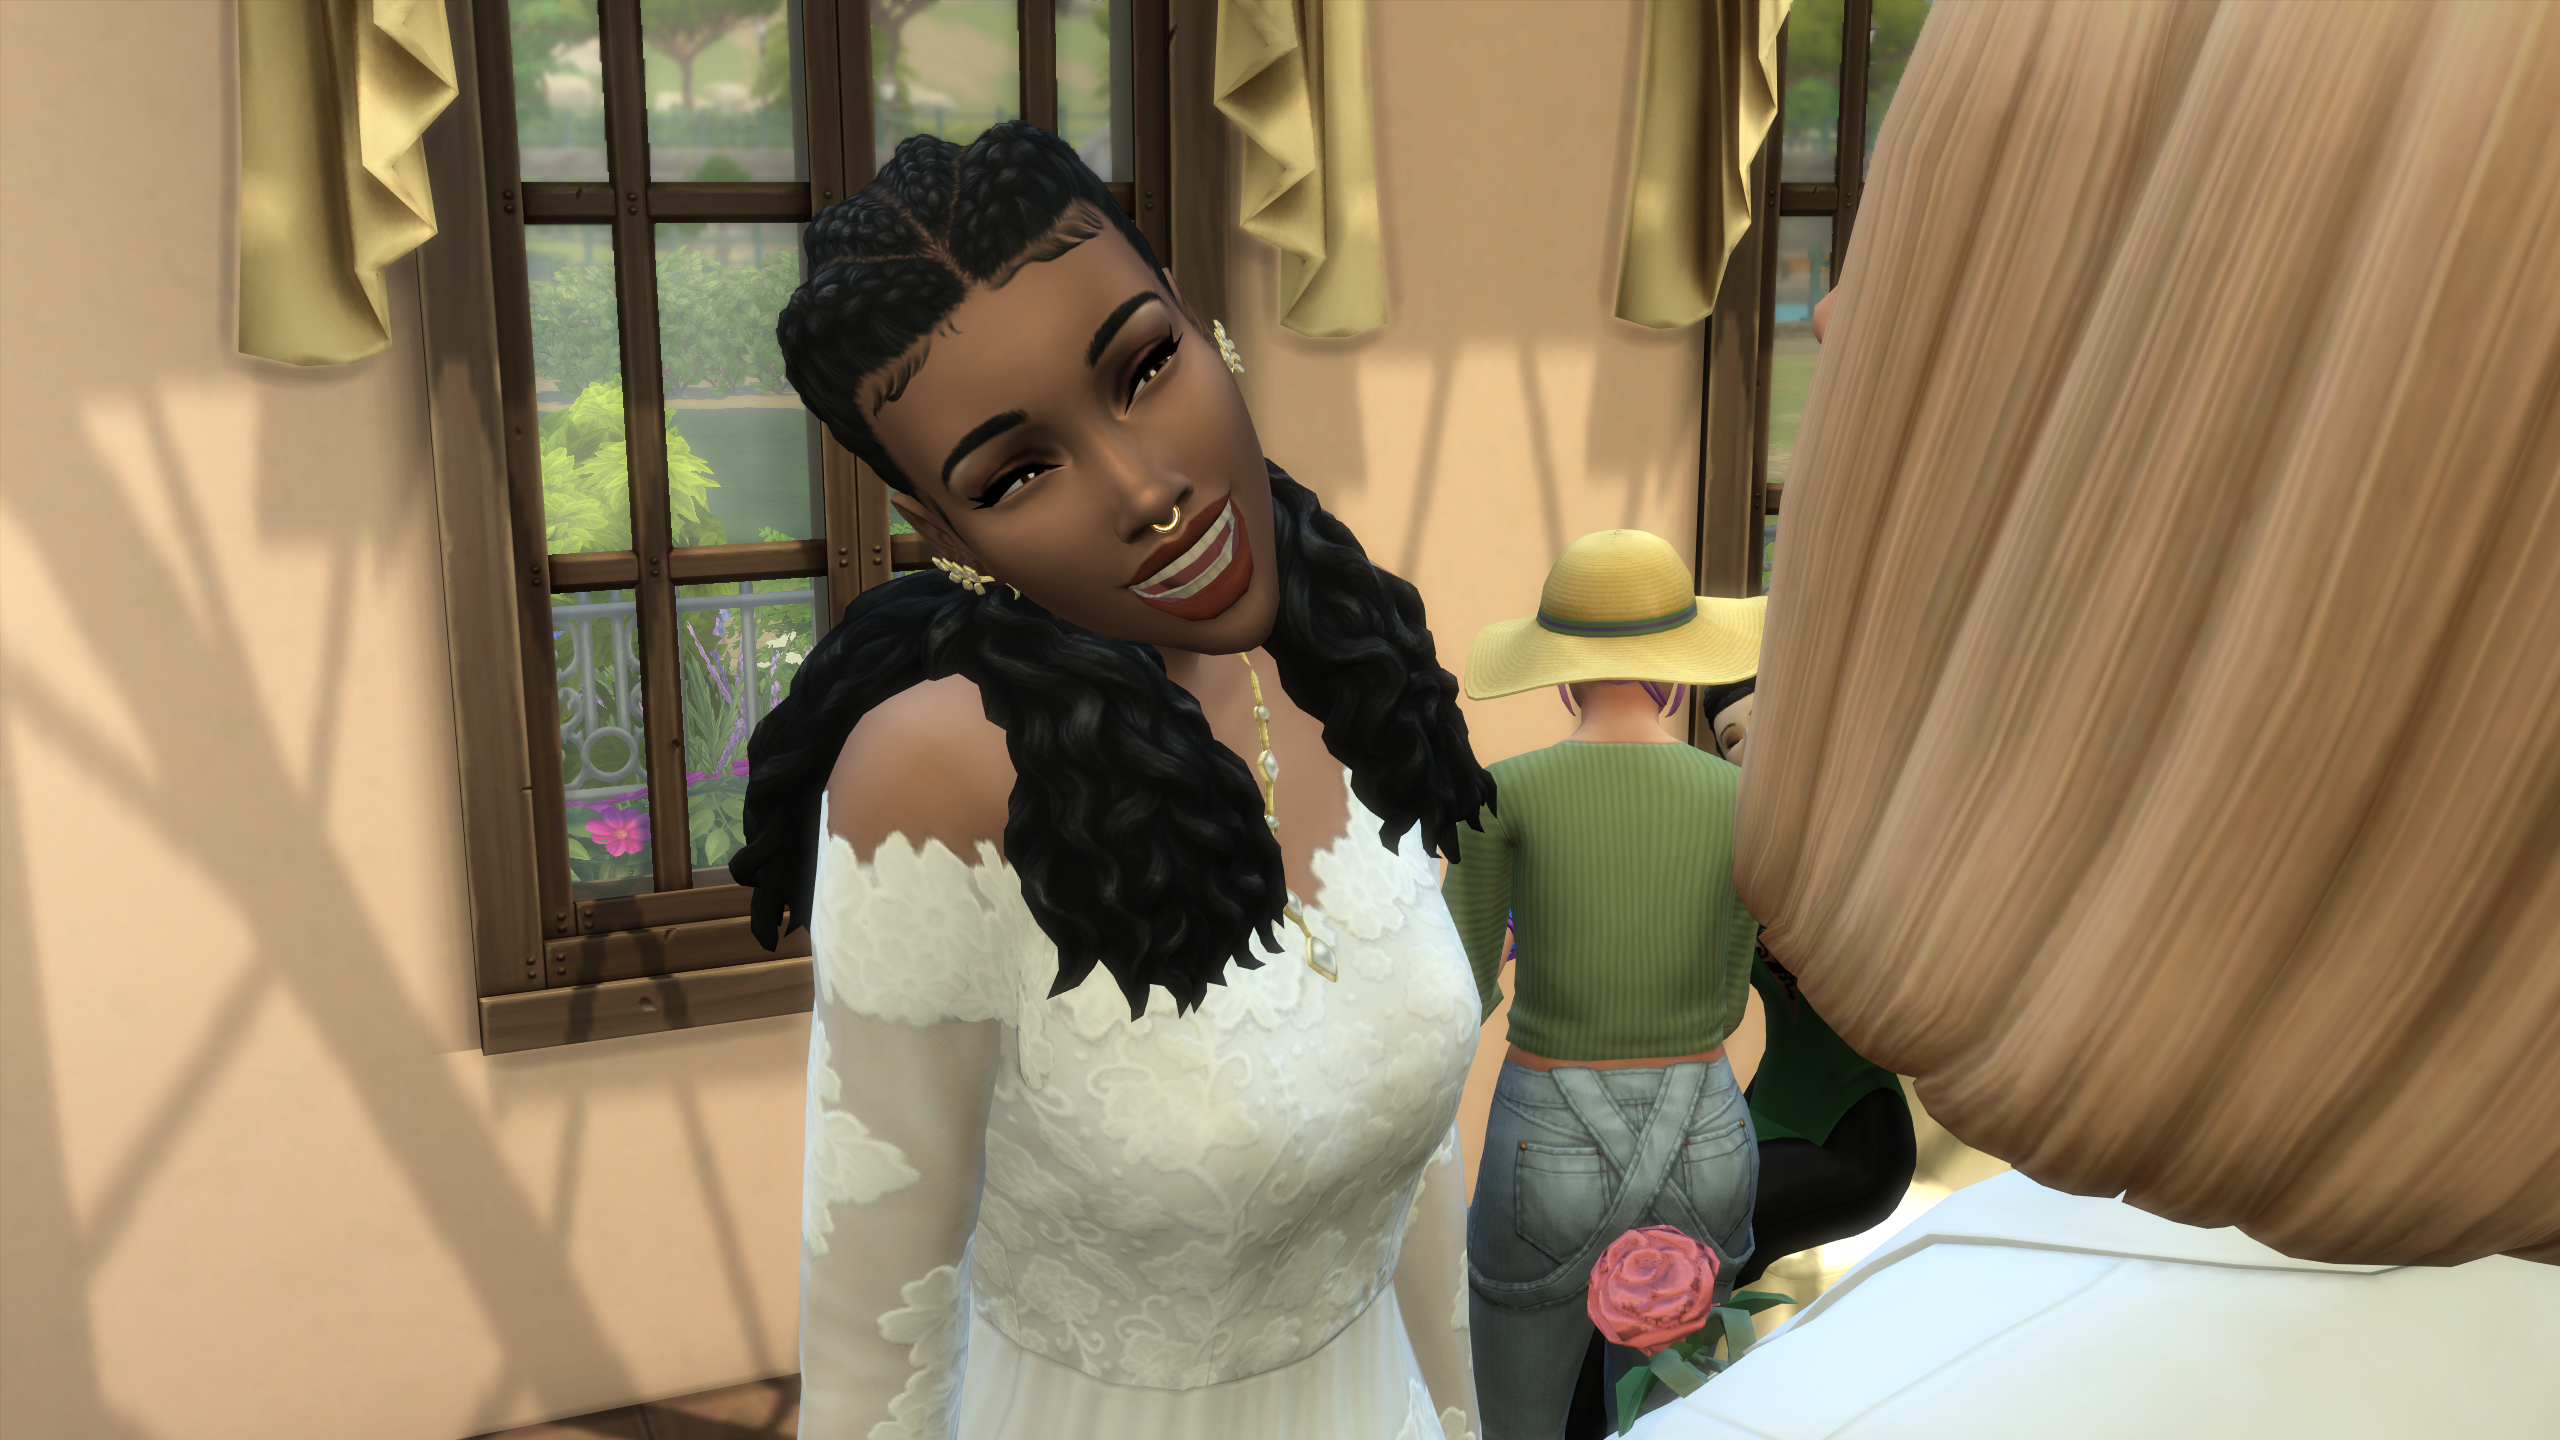 The Bride Smile in The Sims 4: Wedding Story